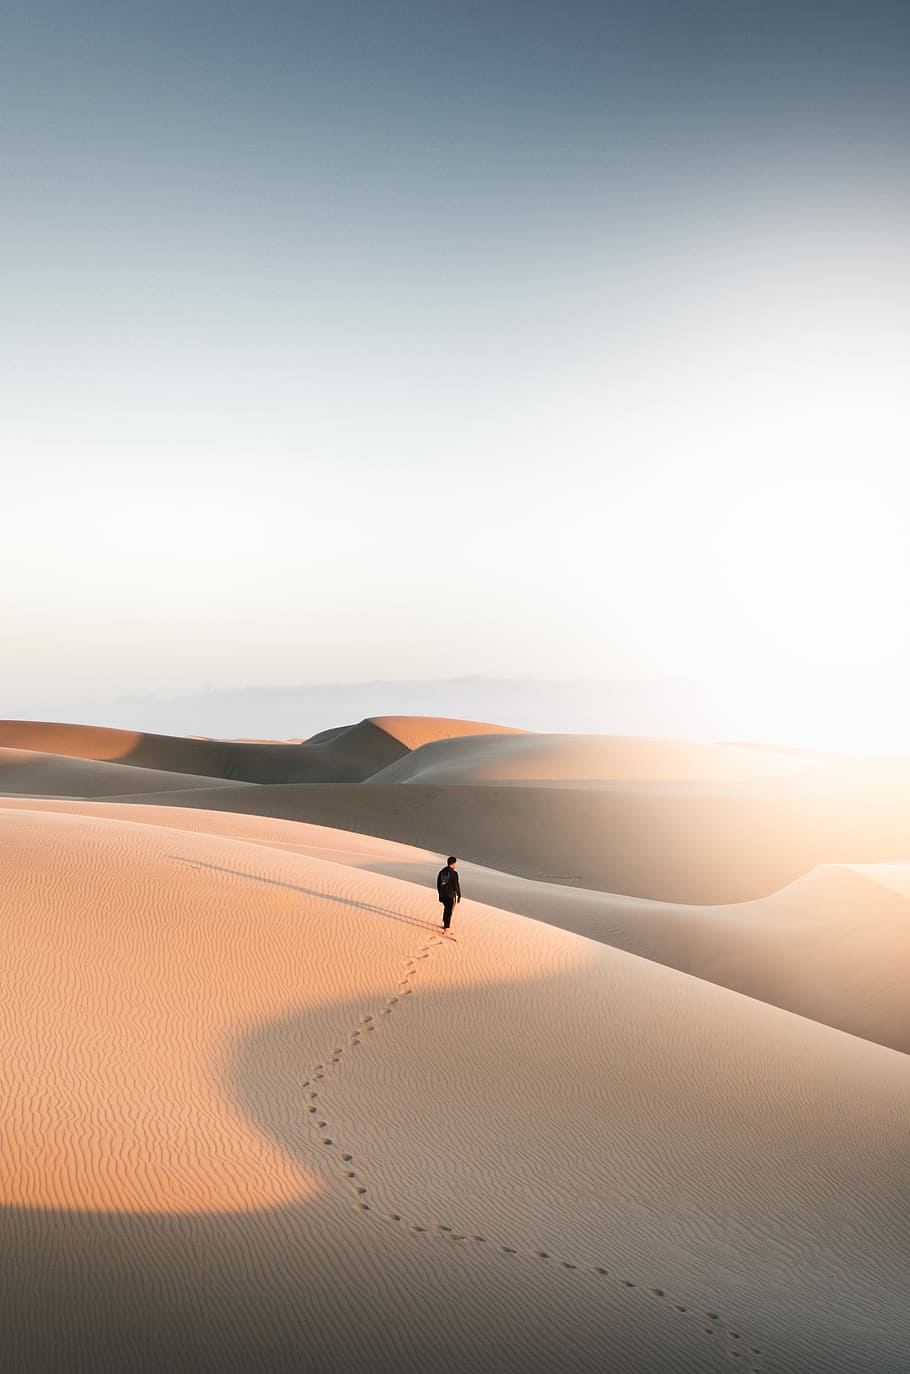 person walking on desert, man standing in the middle of desert